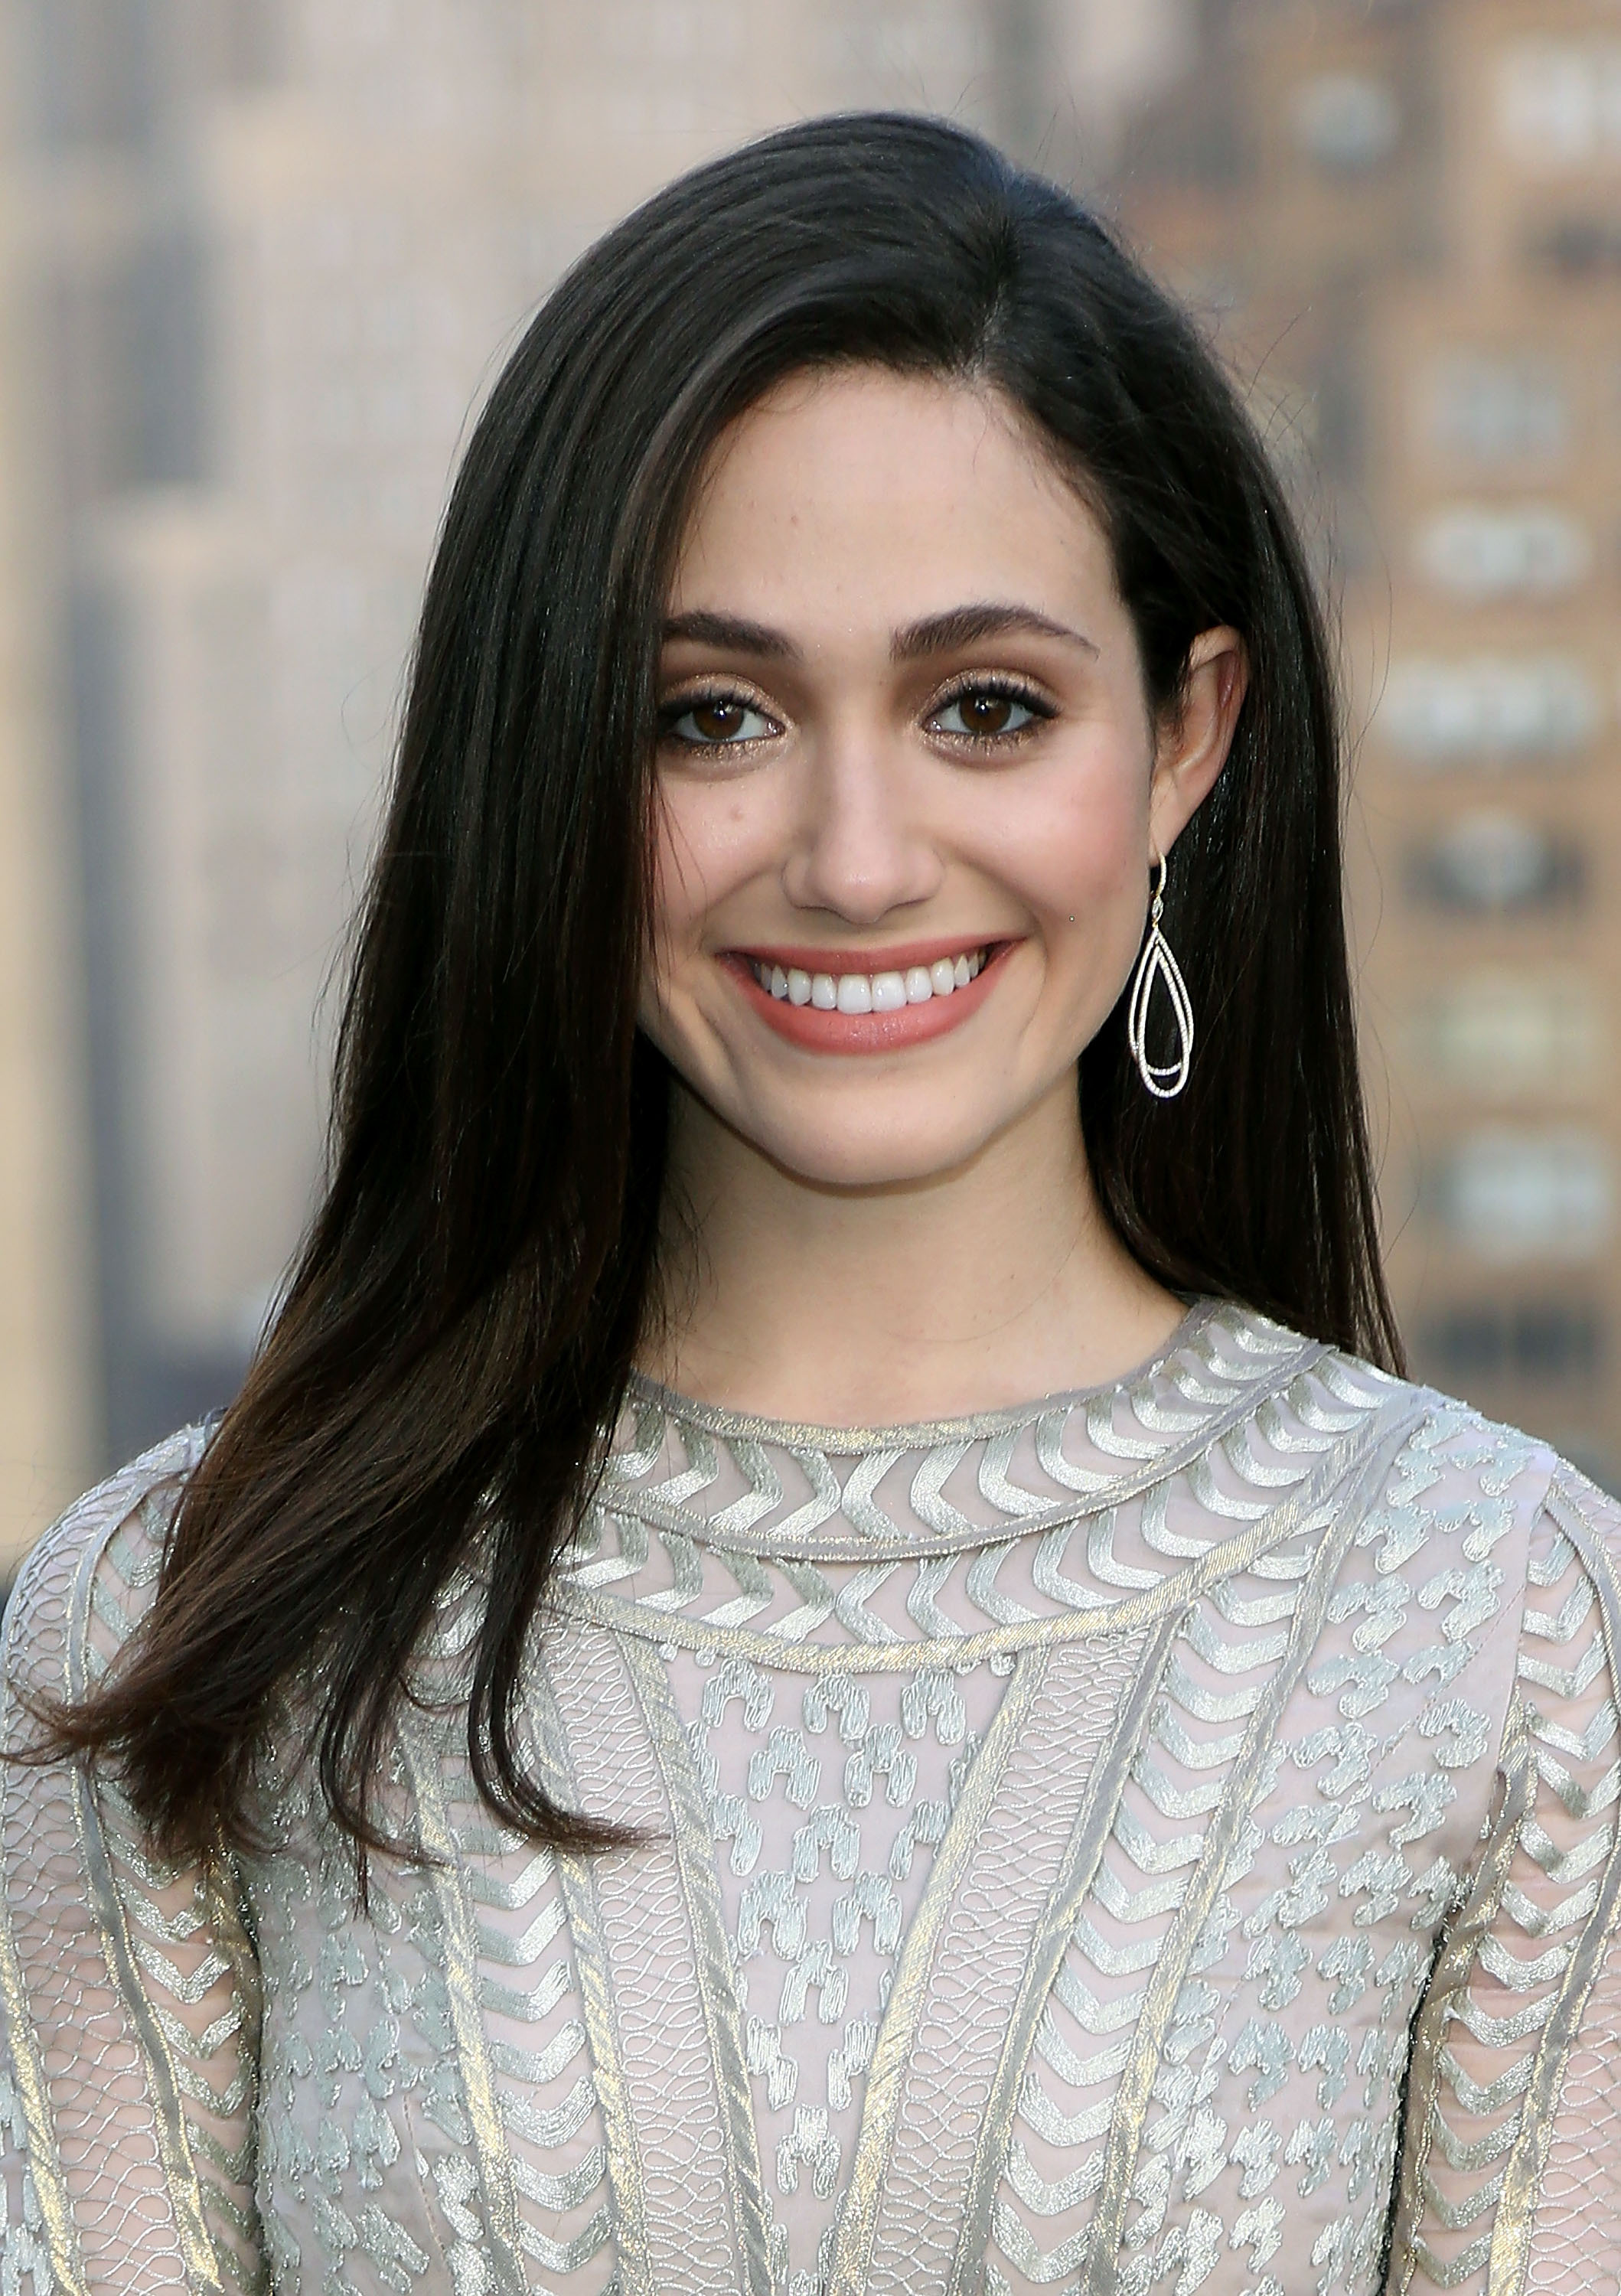 Emmy Rossum Wallpapers Images Photos Pictures Backgrounds